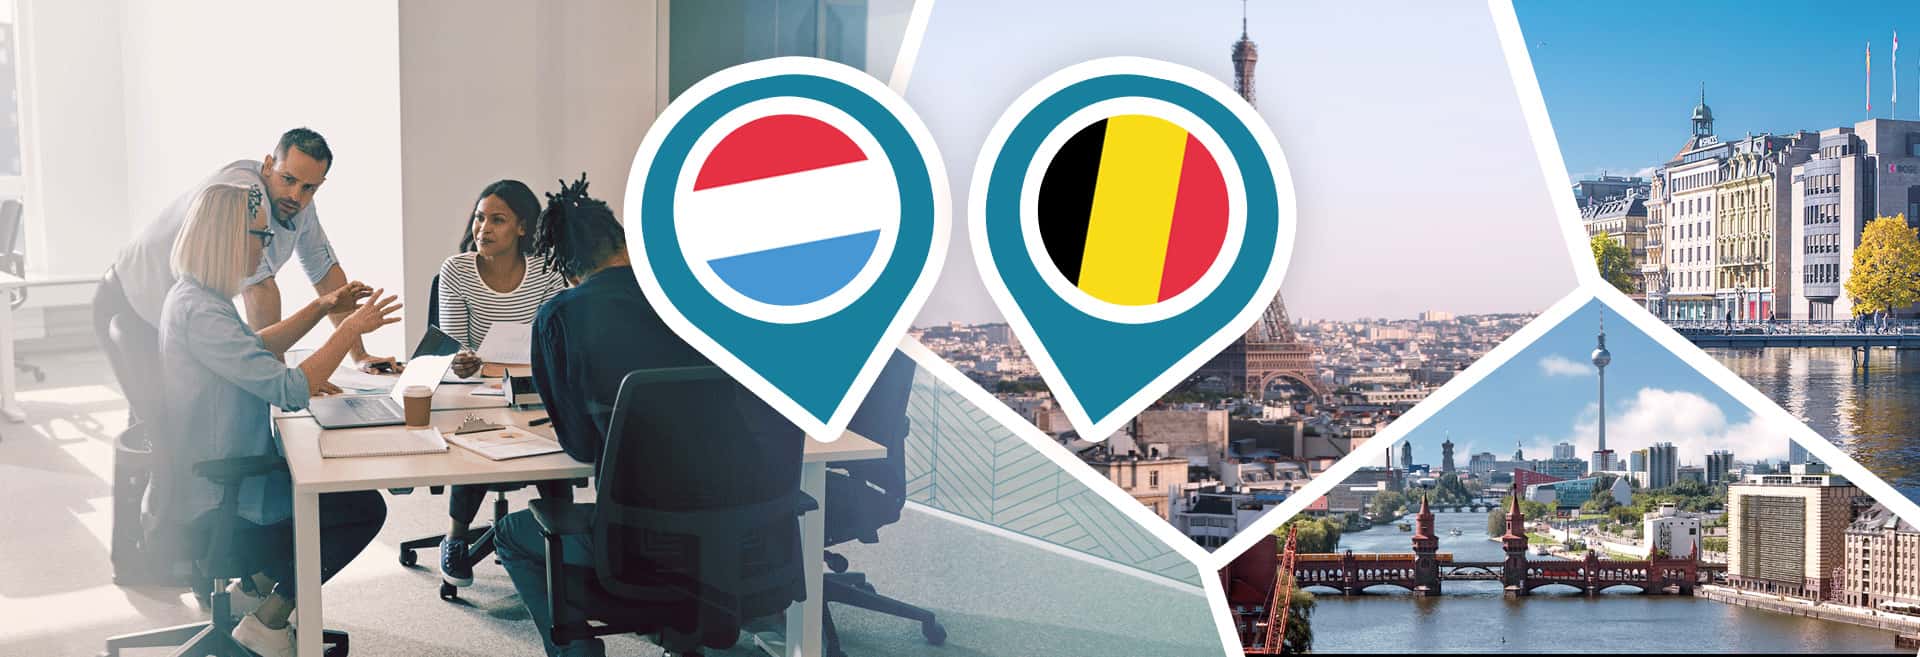 Based in Luxembourg and Brussels, we work across Europe